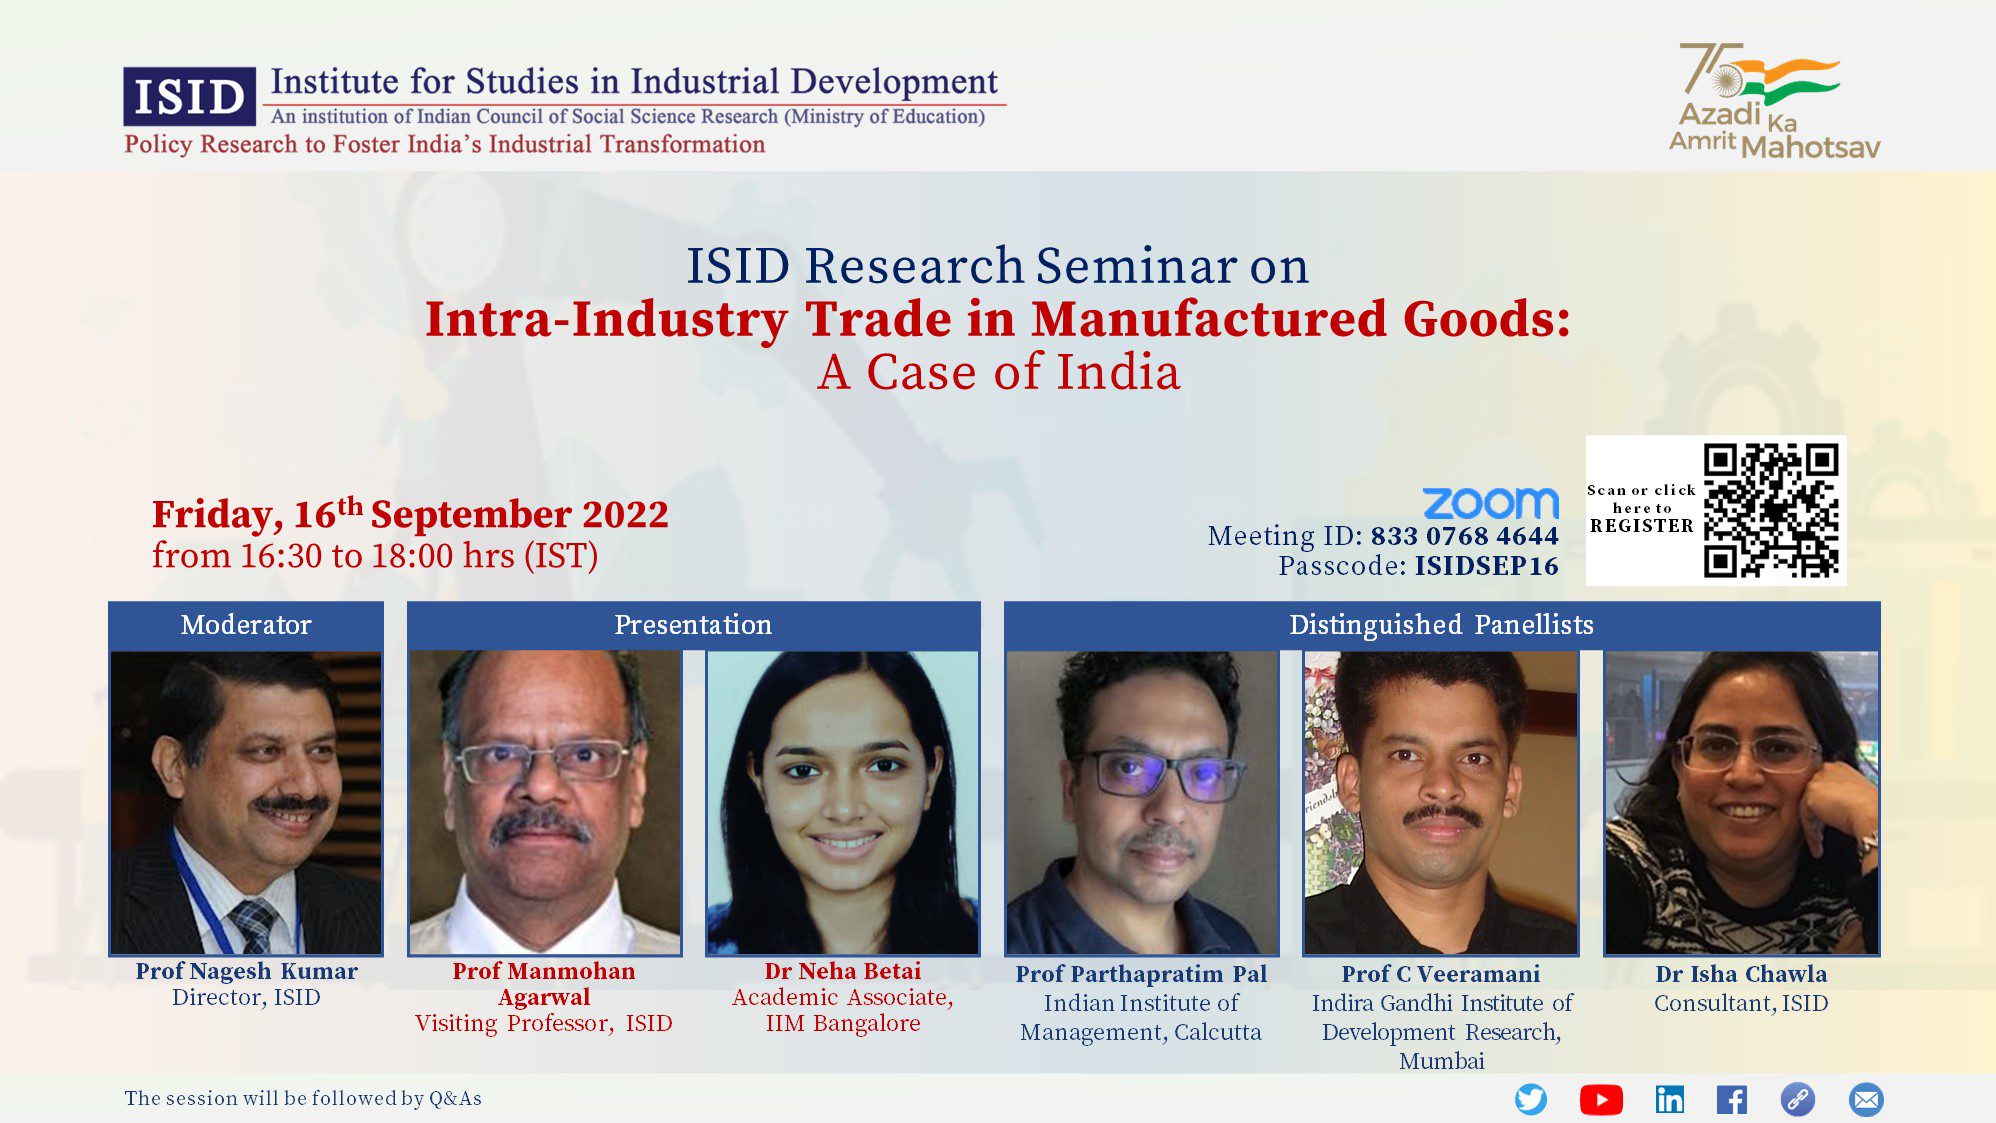 Webinar on Intra-Industry Trade in Manufactured Goods: A Case of India, Sep 16, 2022